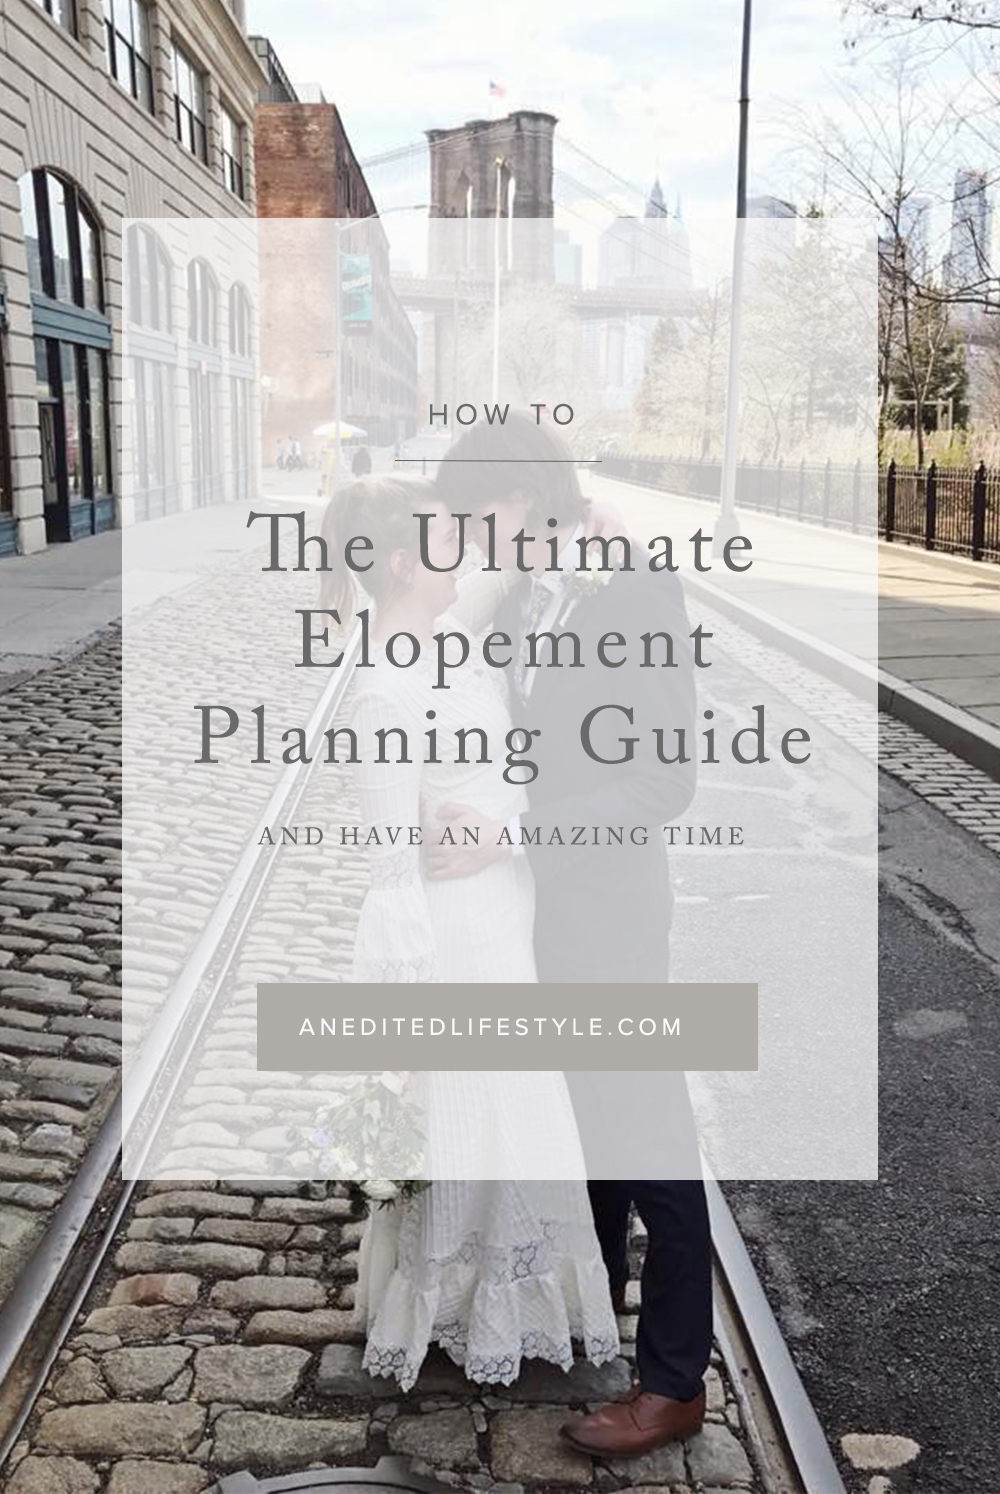 an edited lifestyle wedding tips for eloping